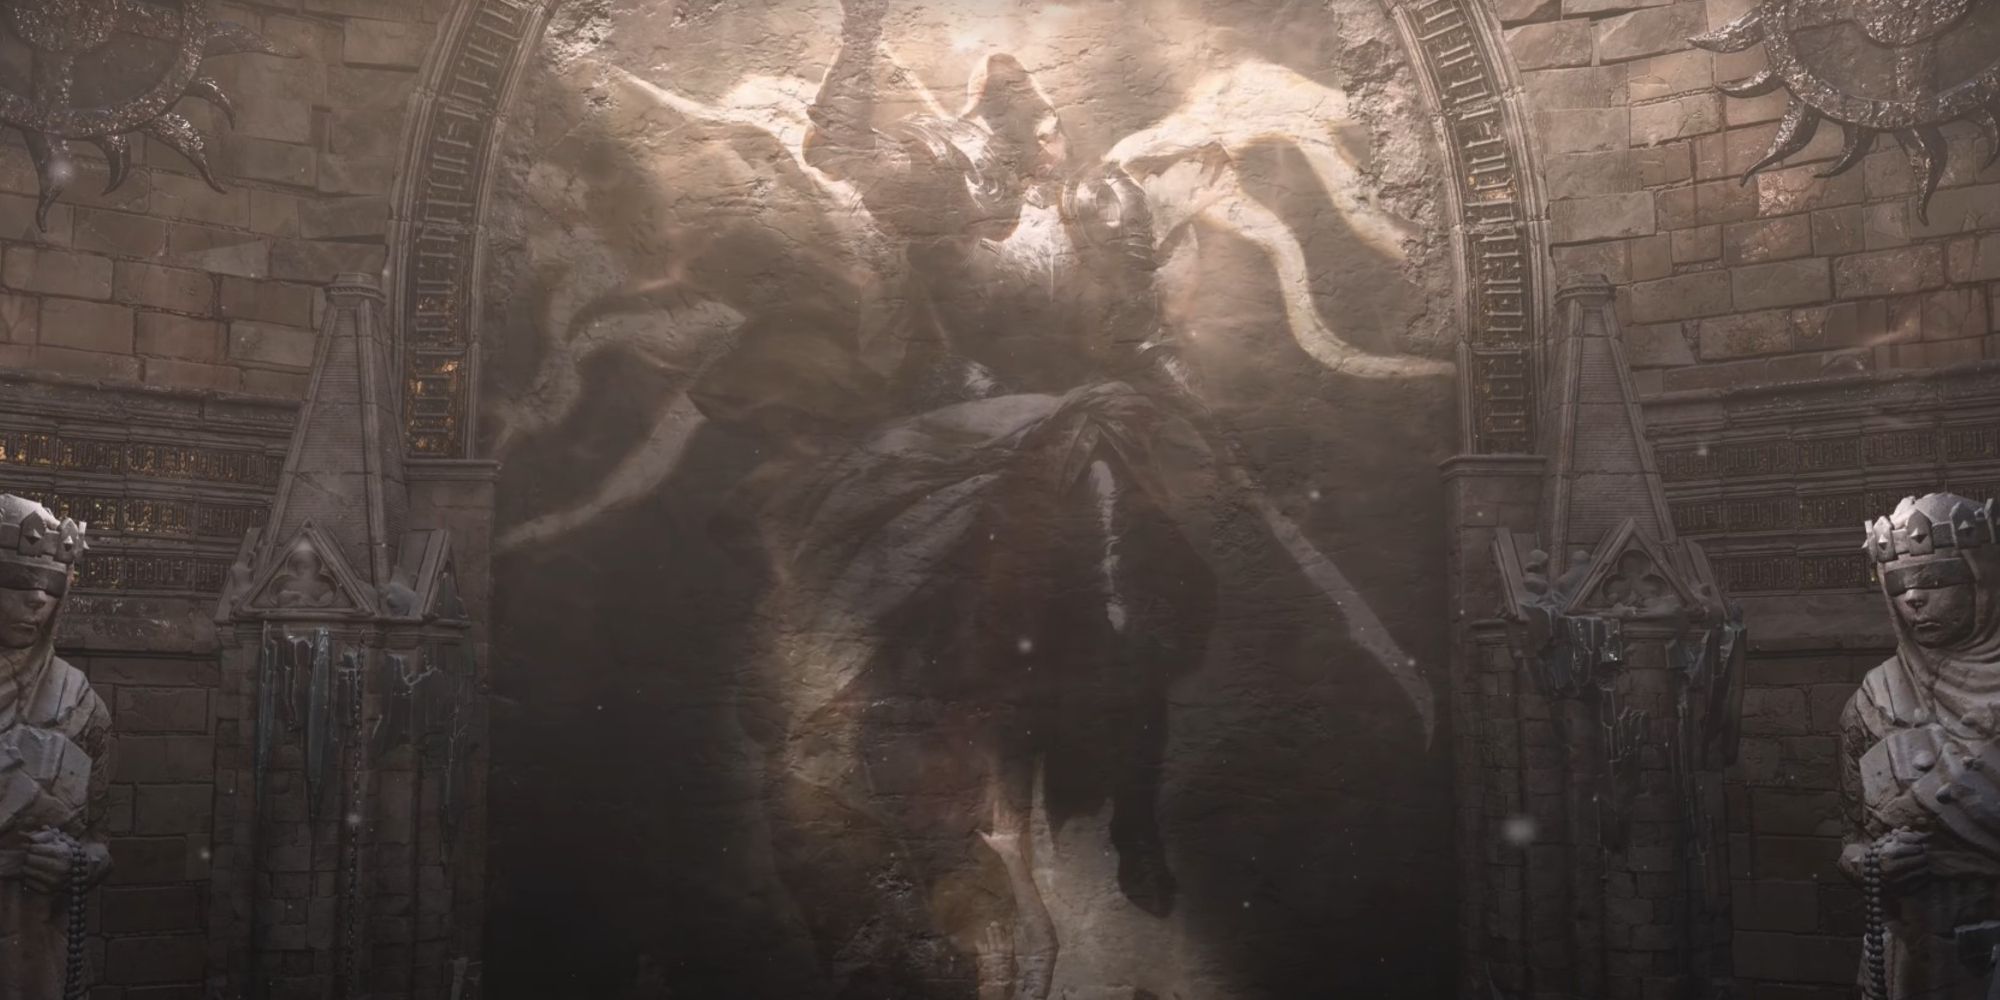 Diablo 4 from the game movie painted on the wall of the cathedral